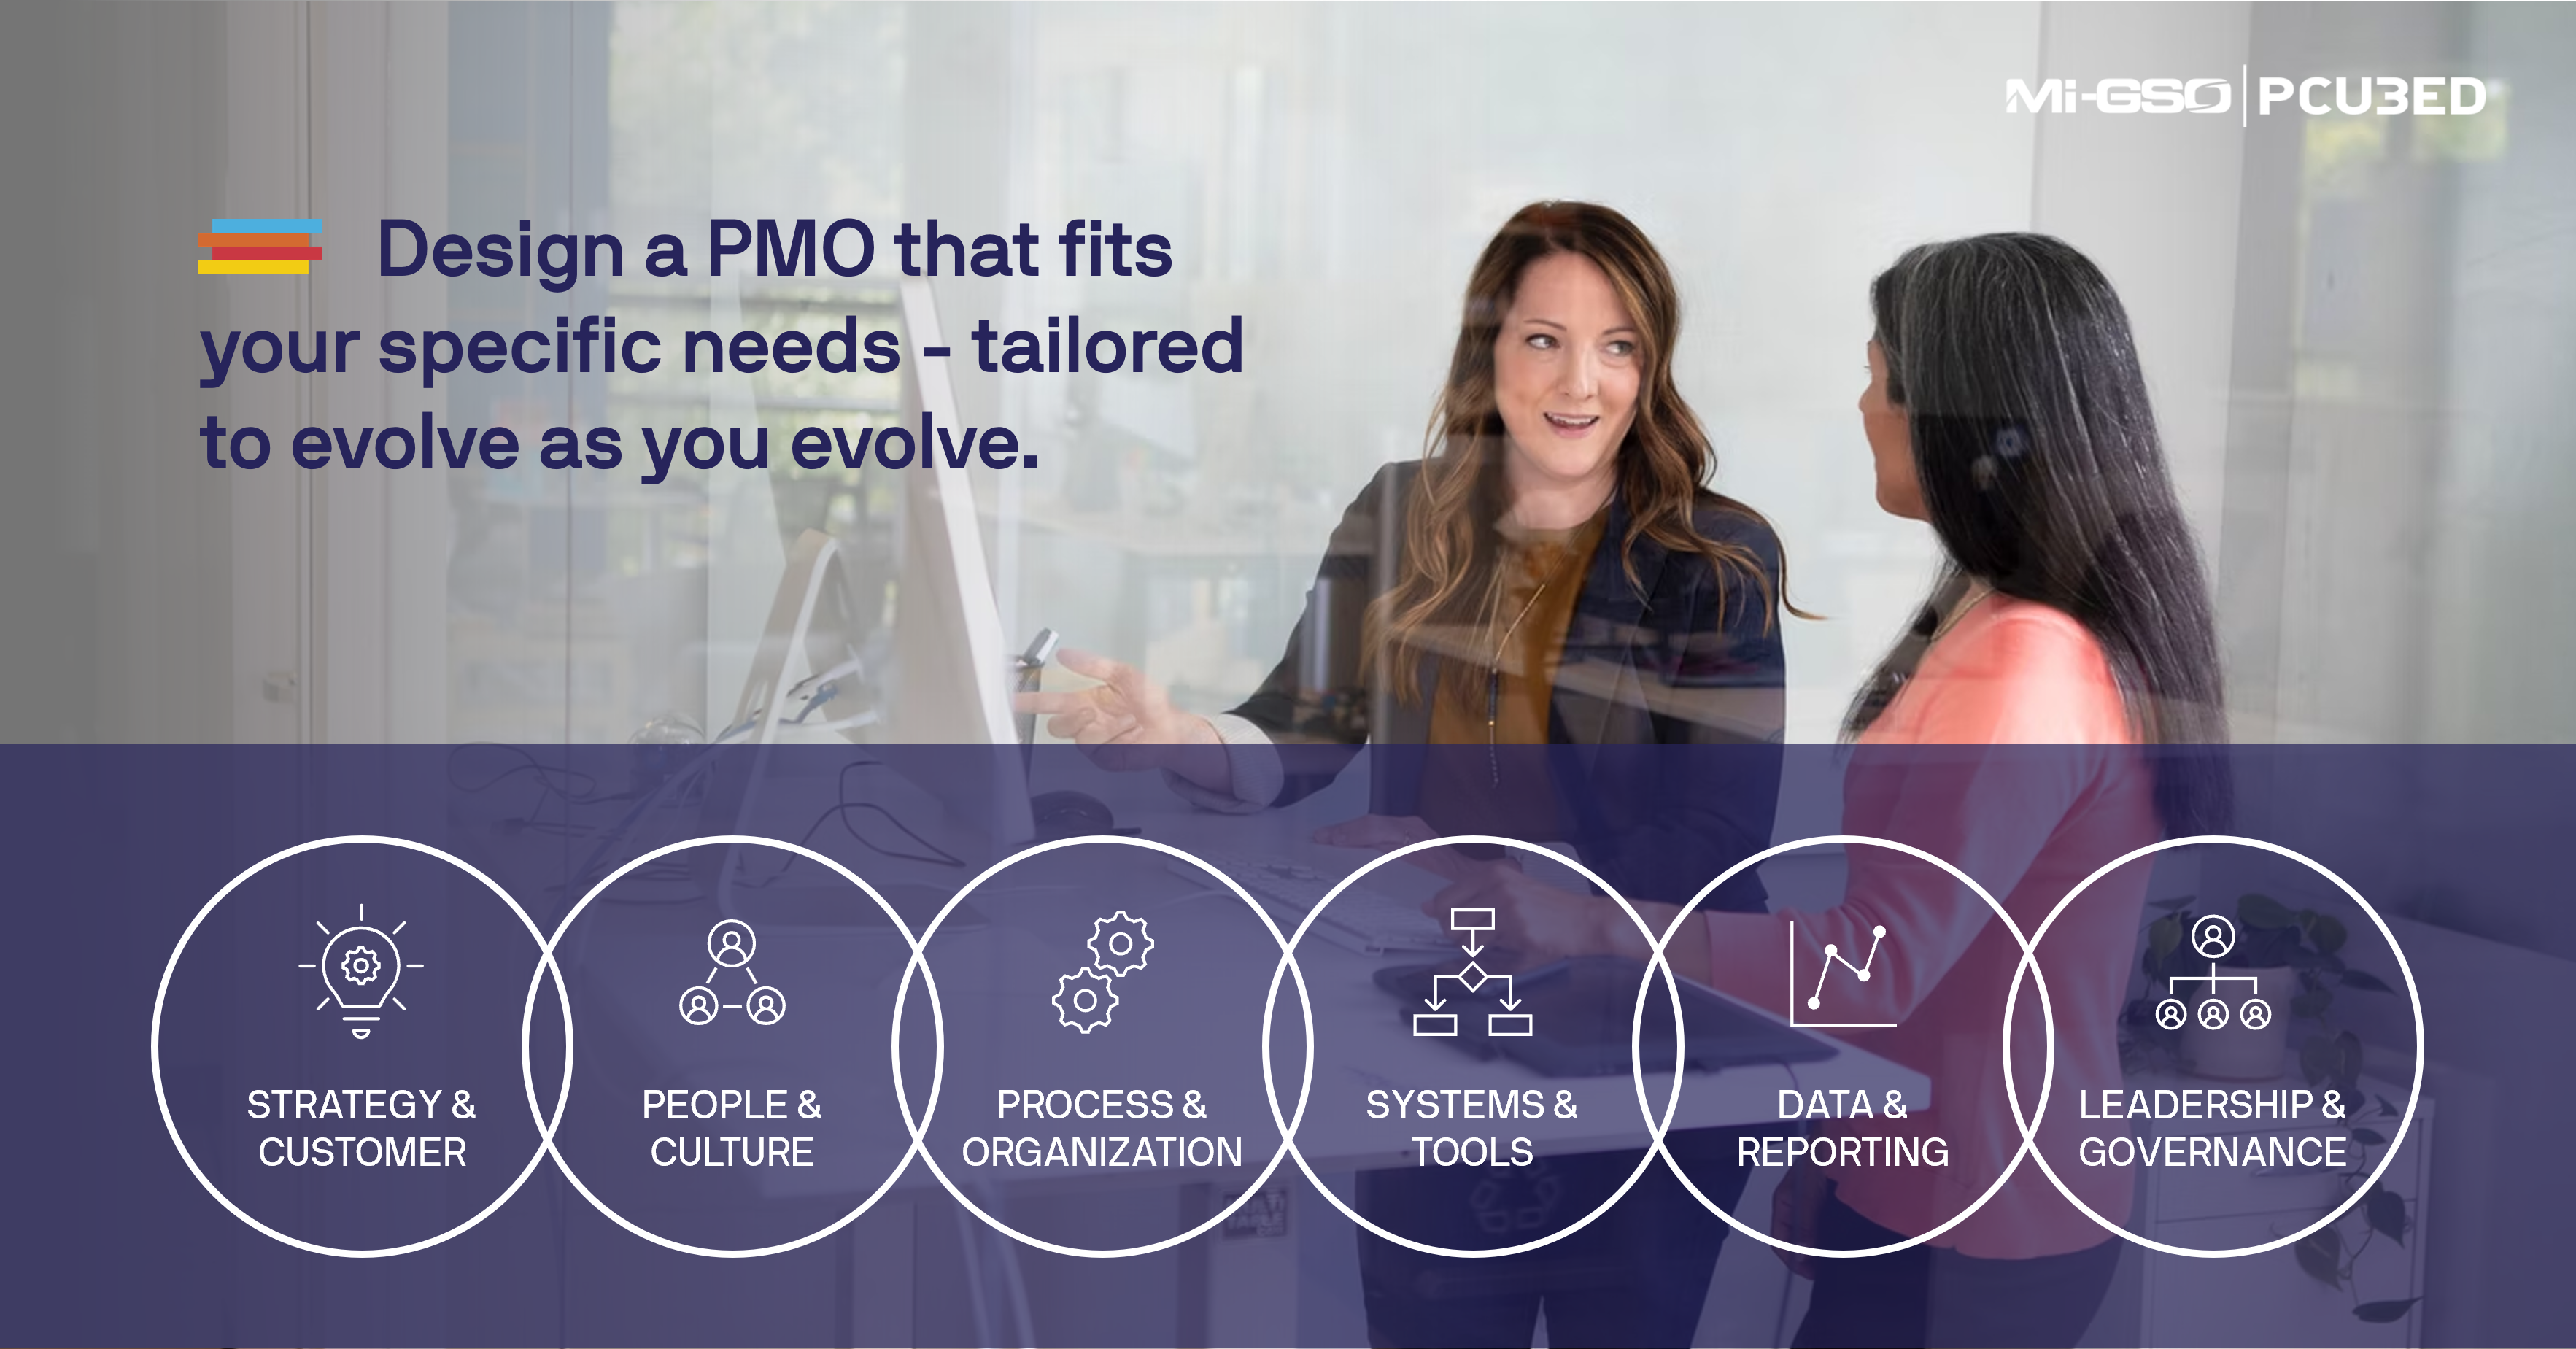 PMO approach based on the elements of a PMO